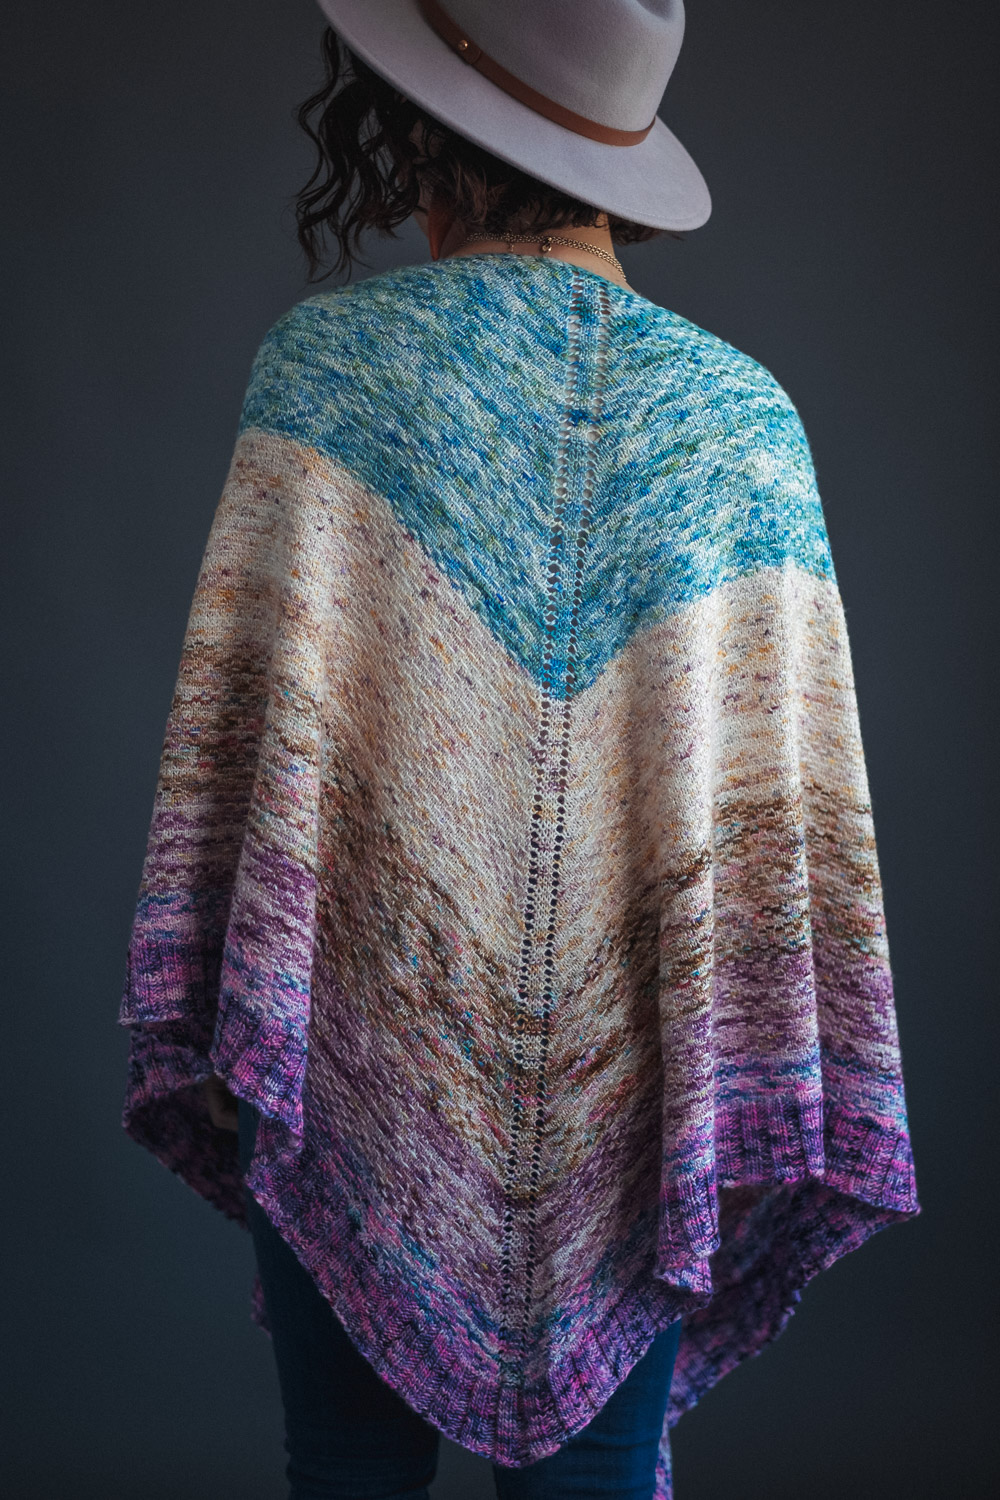 peacock beginner knitted triangle shawl pattern